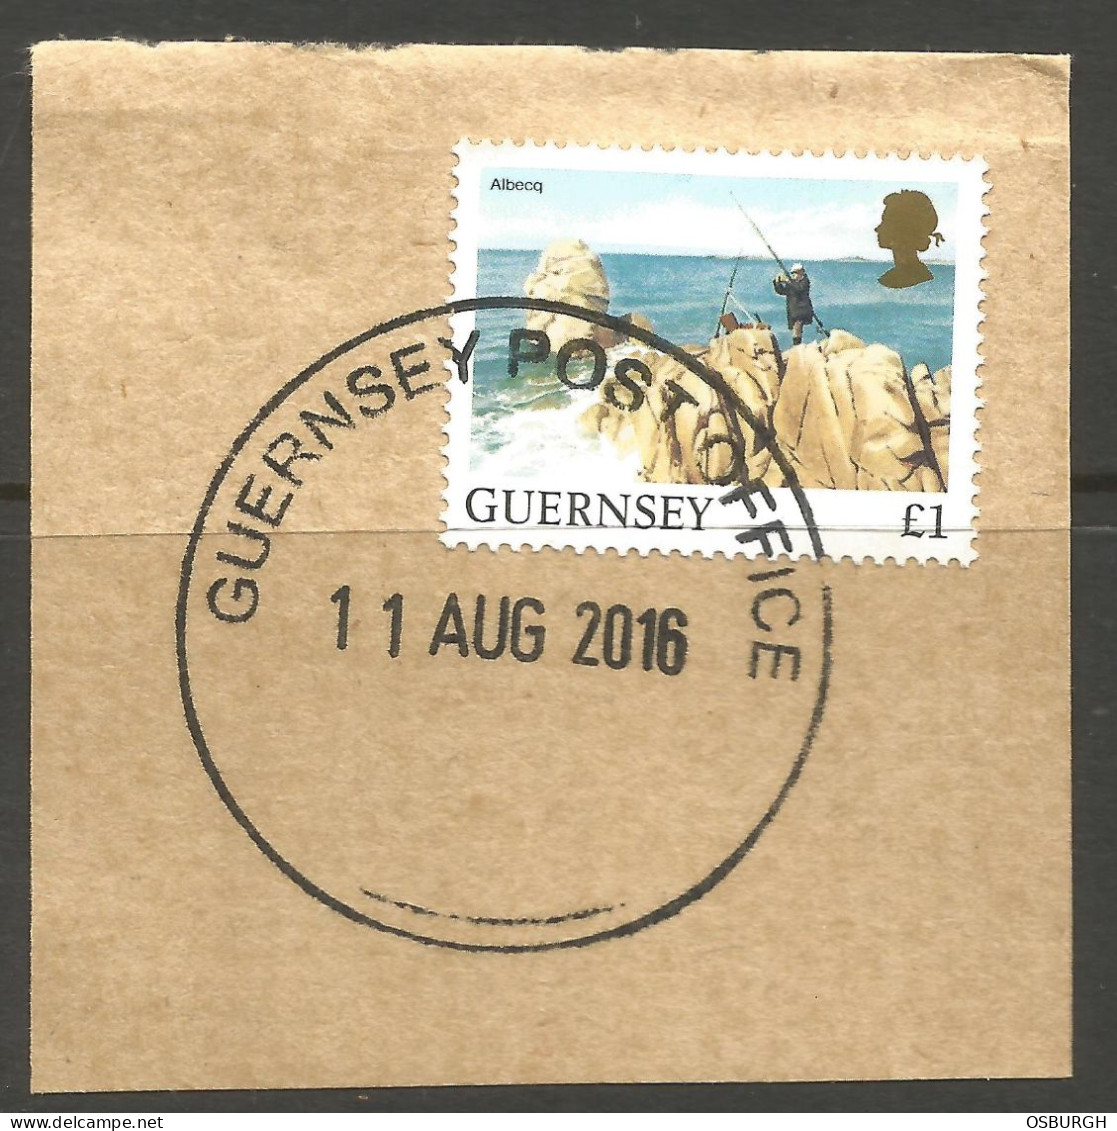 GREAT BRITAIN / GUERNSEY. 2016. £1 FISHING USED ON PIECE. - Guernesey